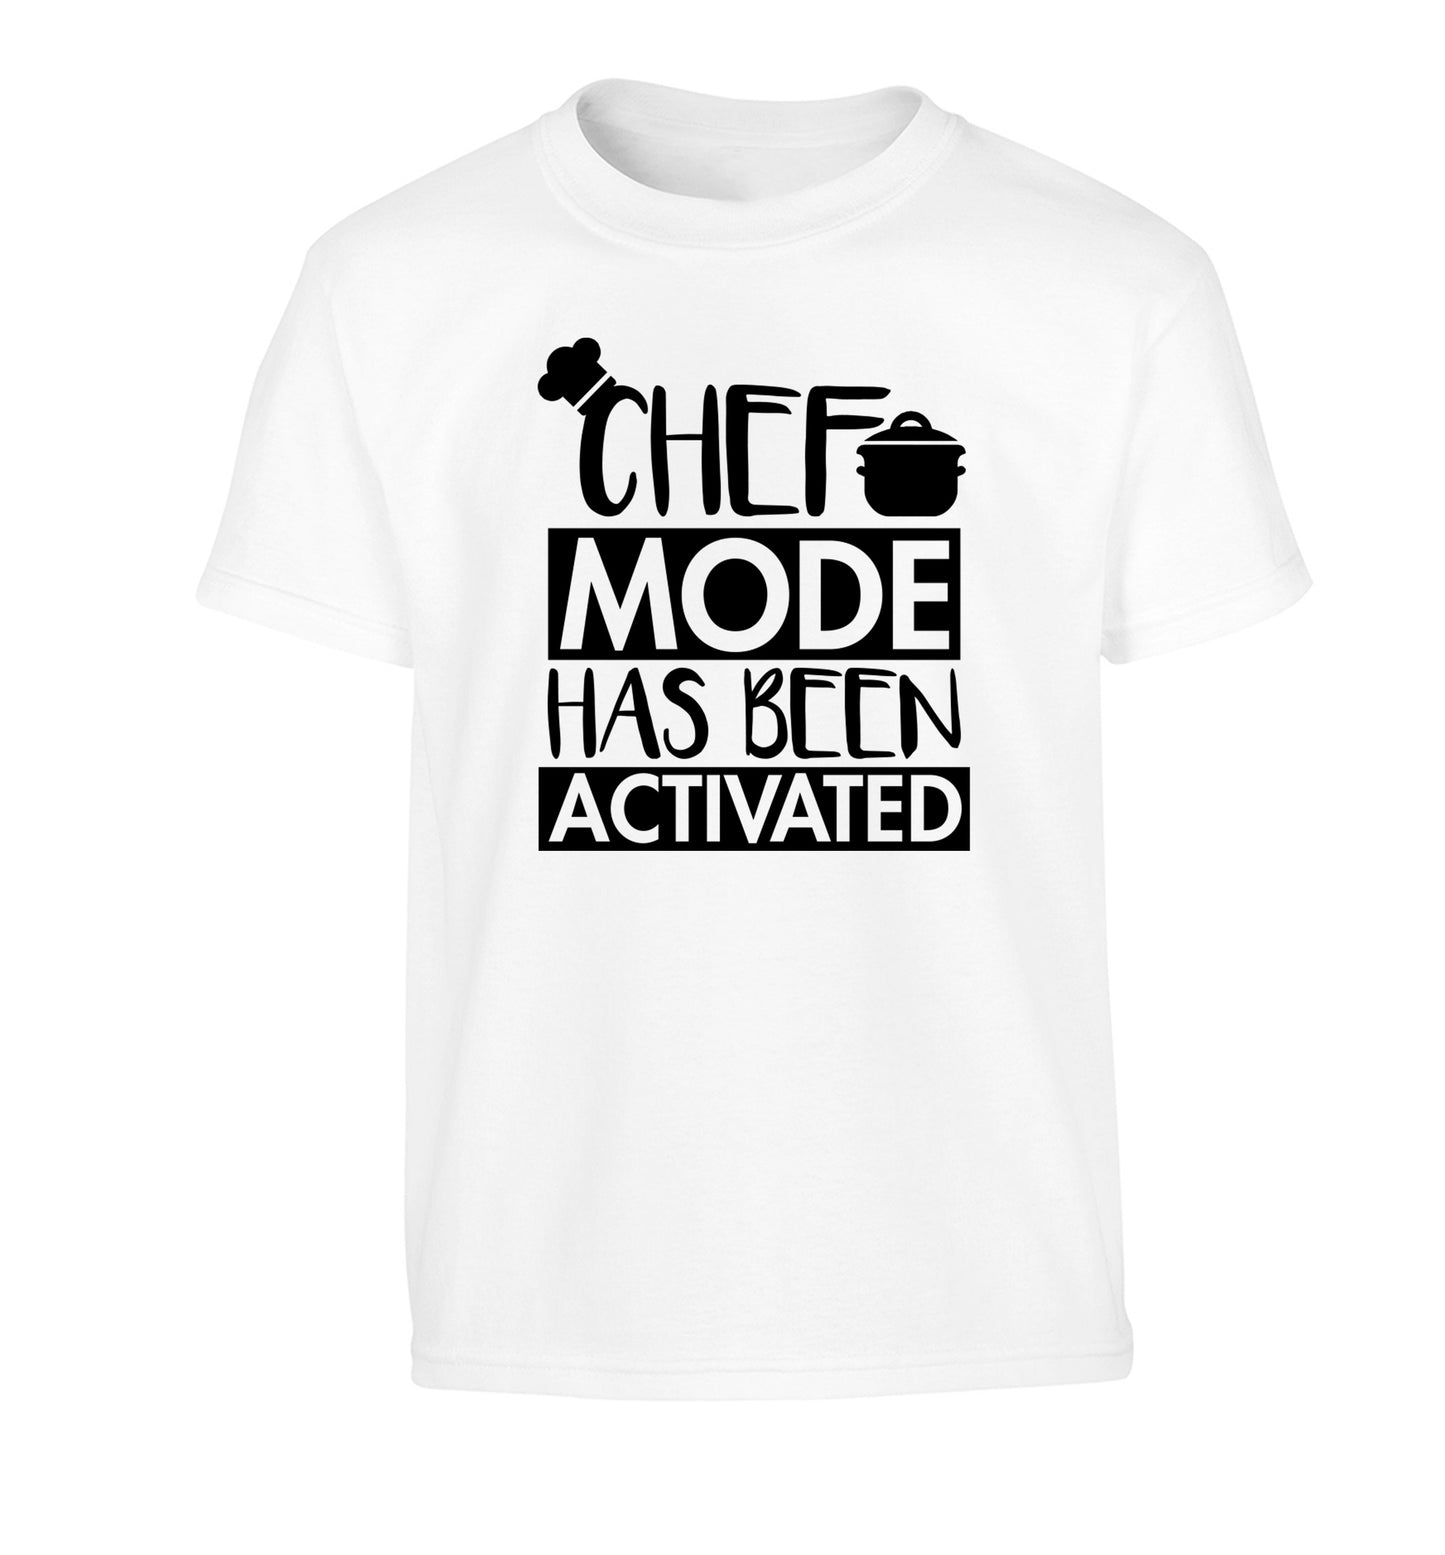 Chef mode has been activated Children's white Tshirt 12-14 Years